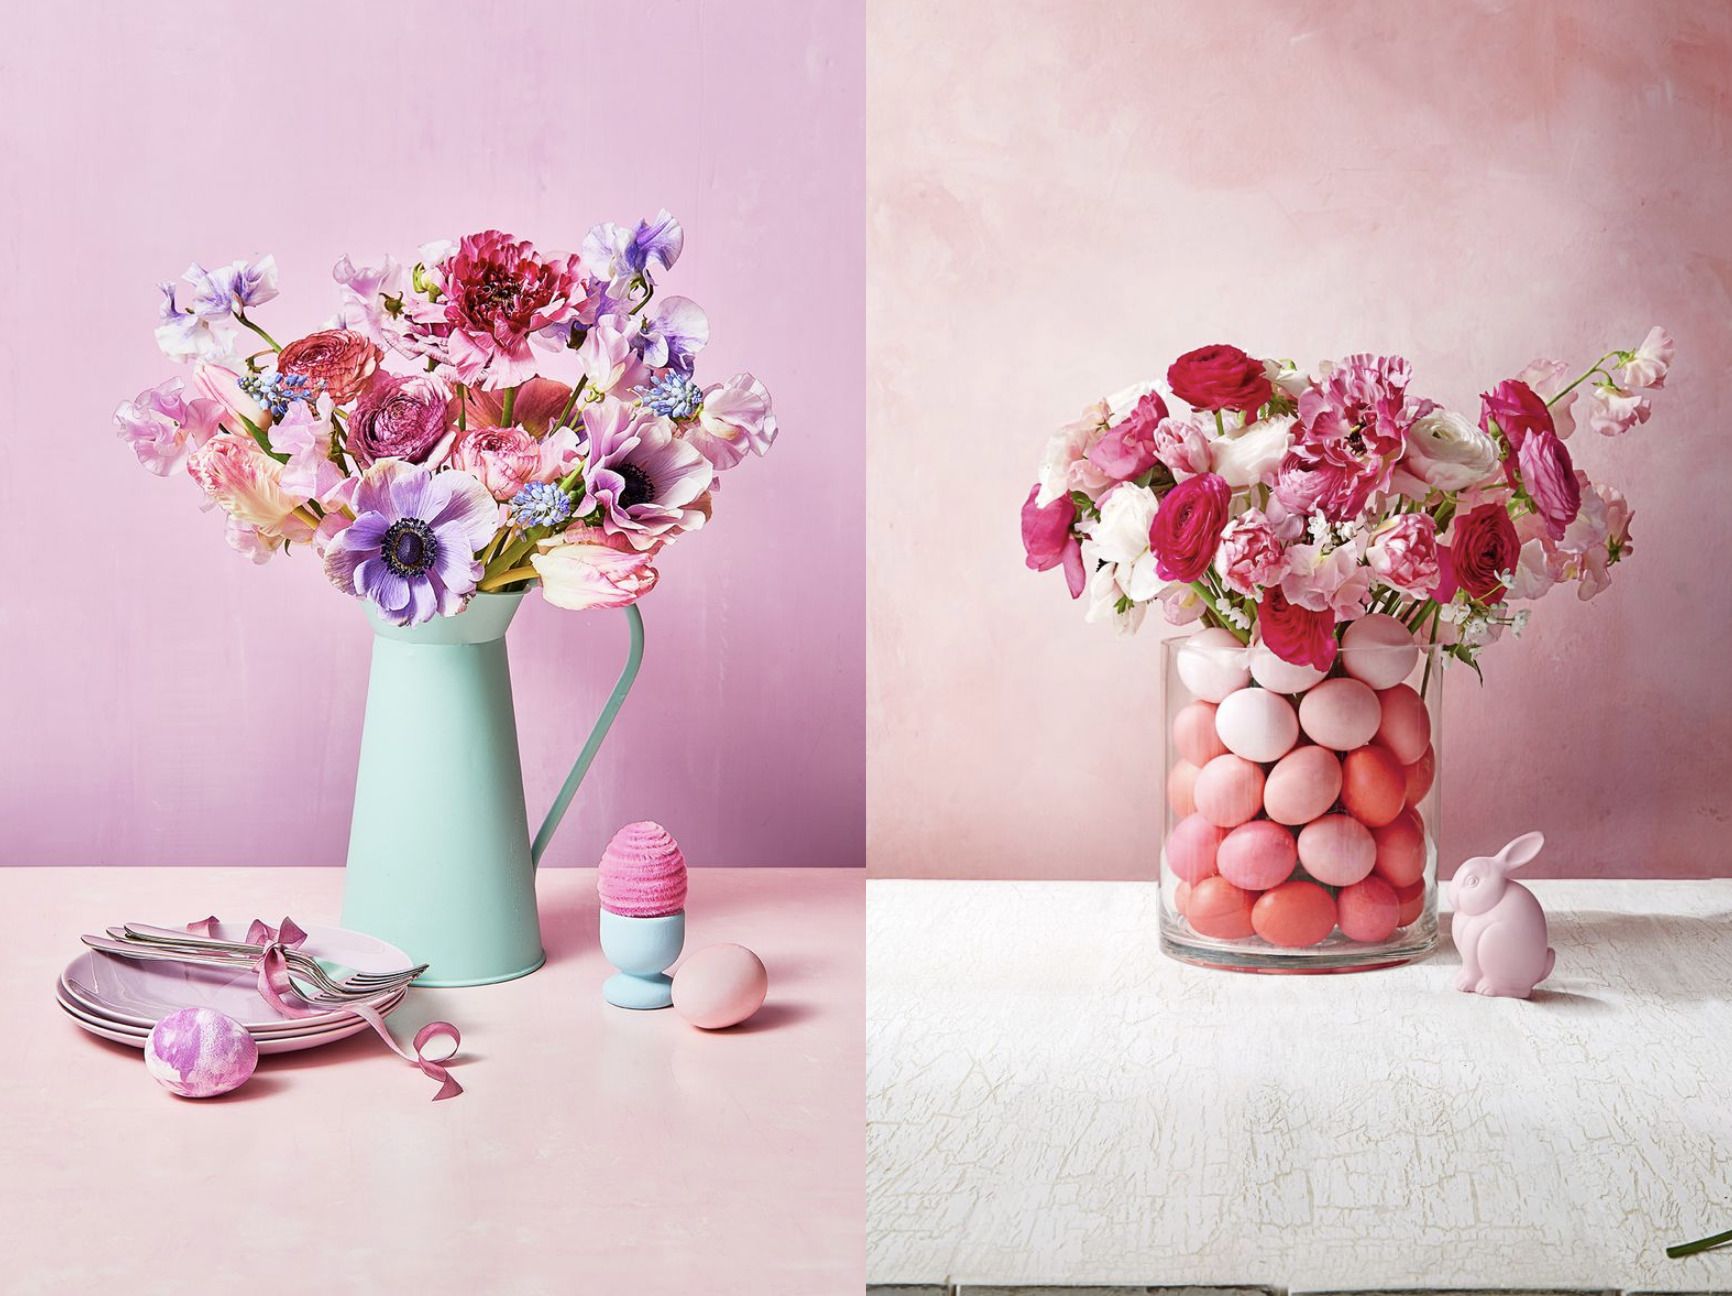 How to use Floral Foam (tips from a floral designer) - Celebrated Nest